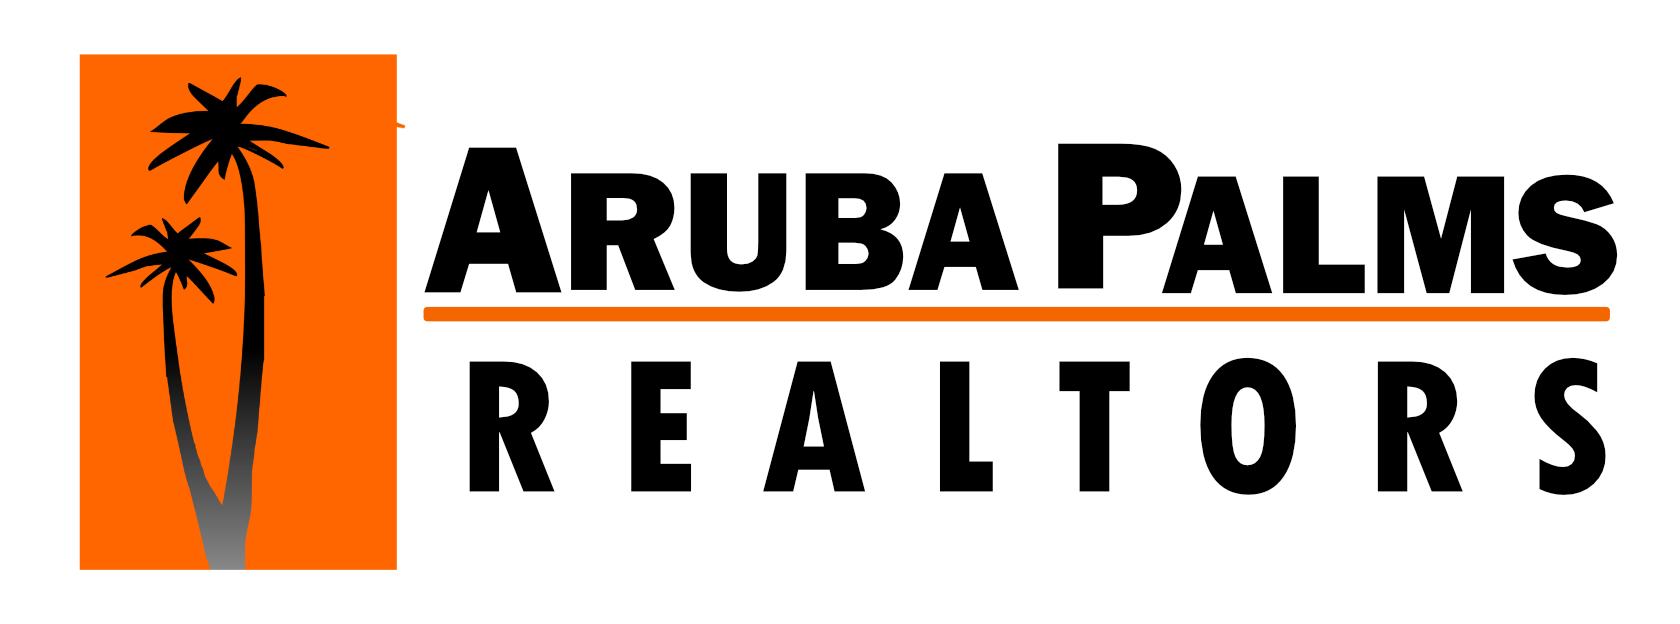 Aruba Palms Realtors Outline the Benefits of Selecting Vacation Rentals Over Traditional Accommodations